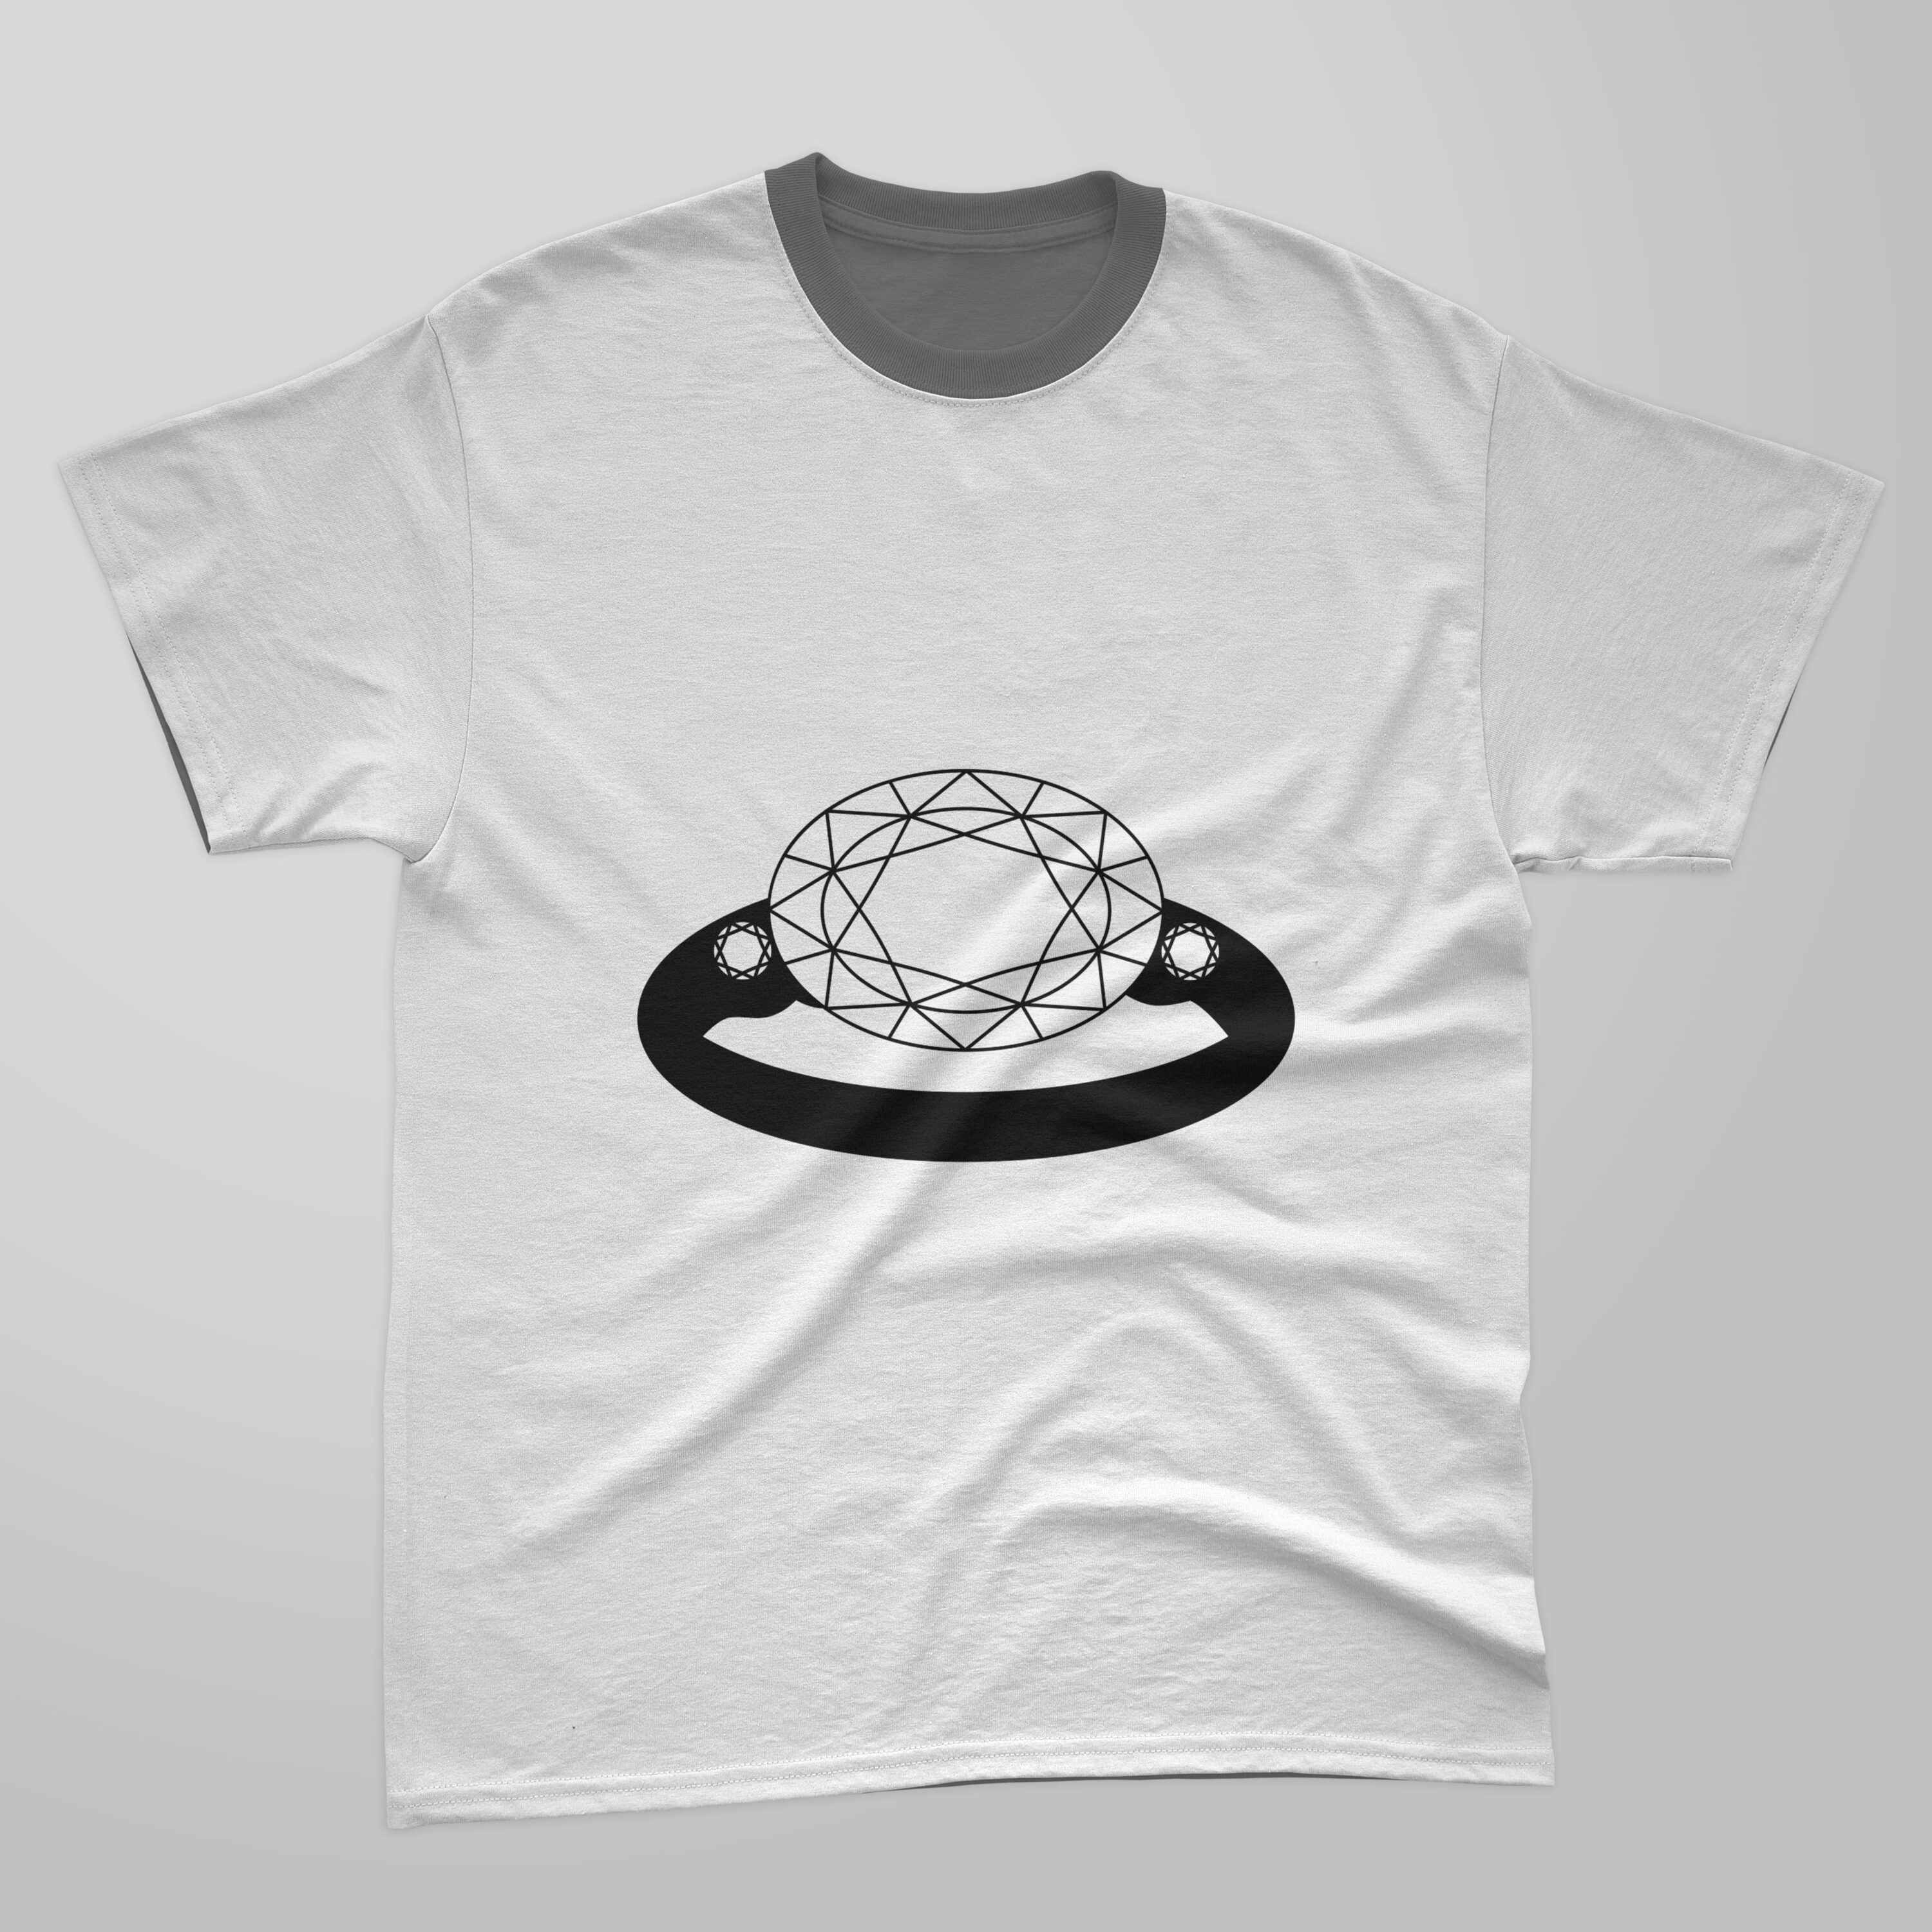 Image of t-shirt with lovely print of diamond ring silhouette.